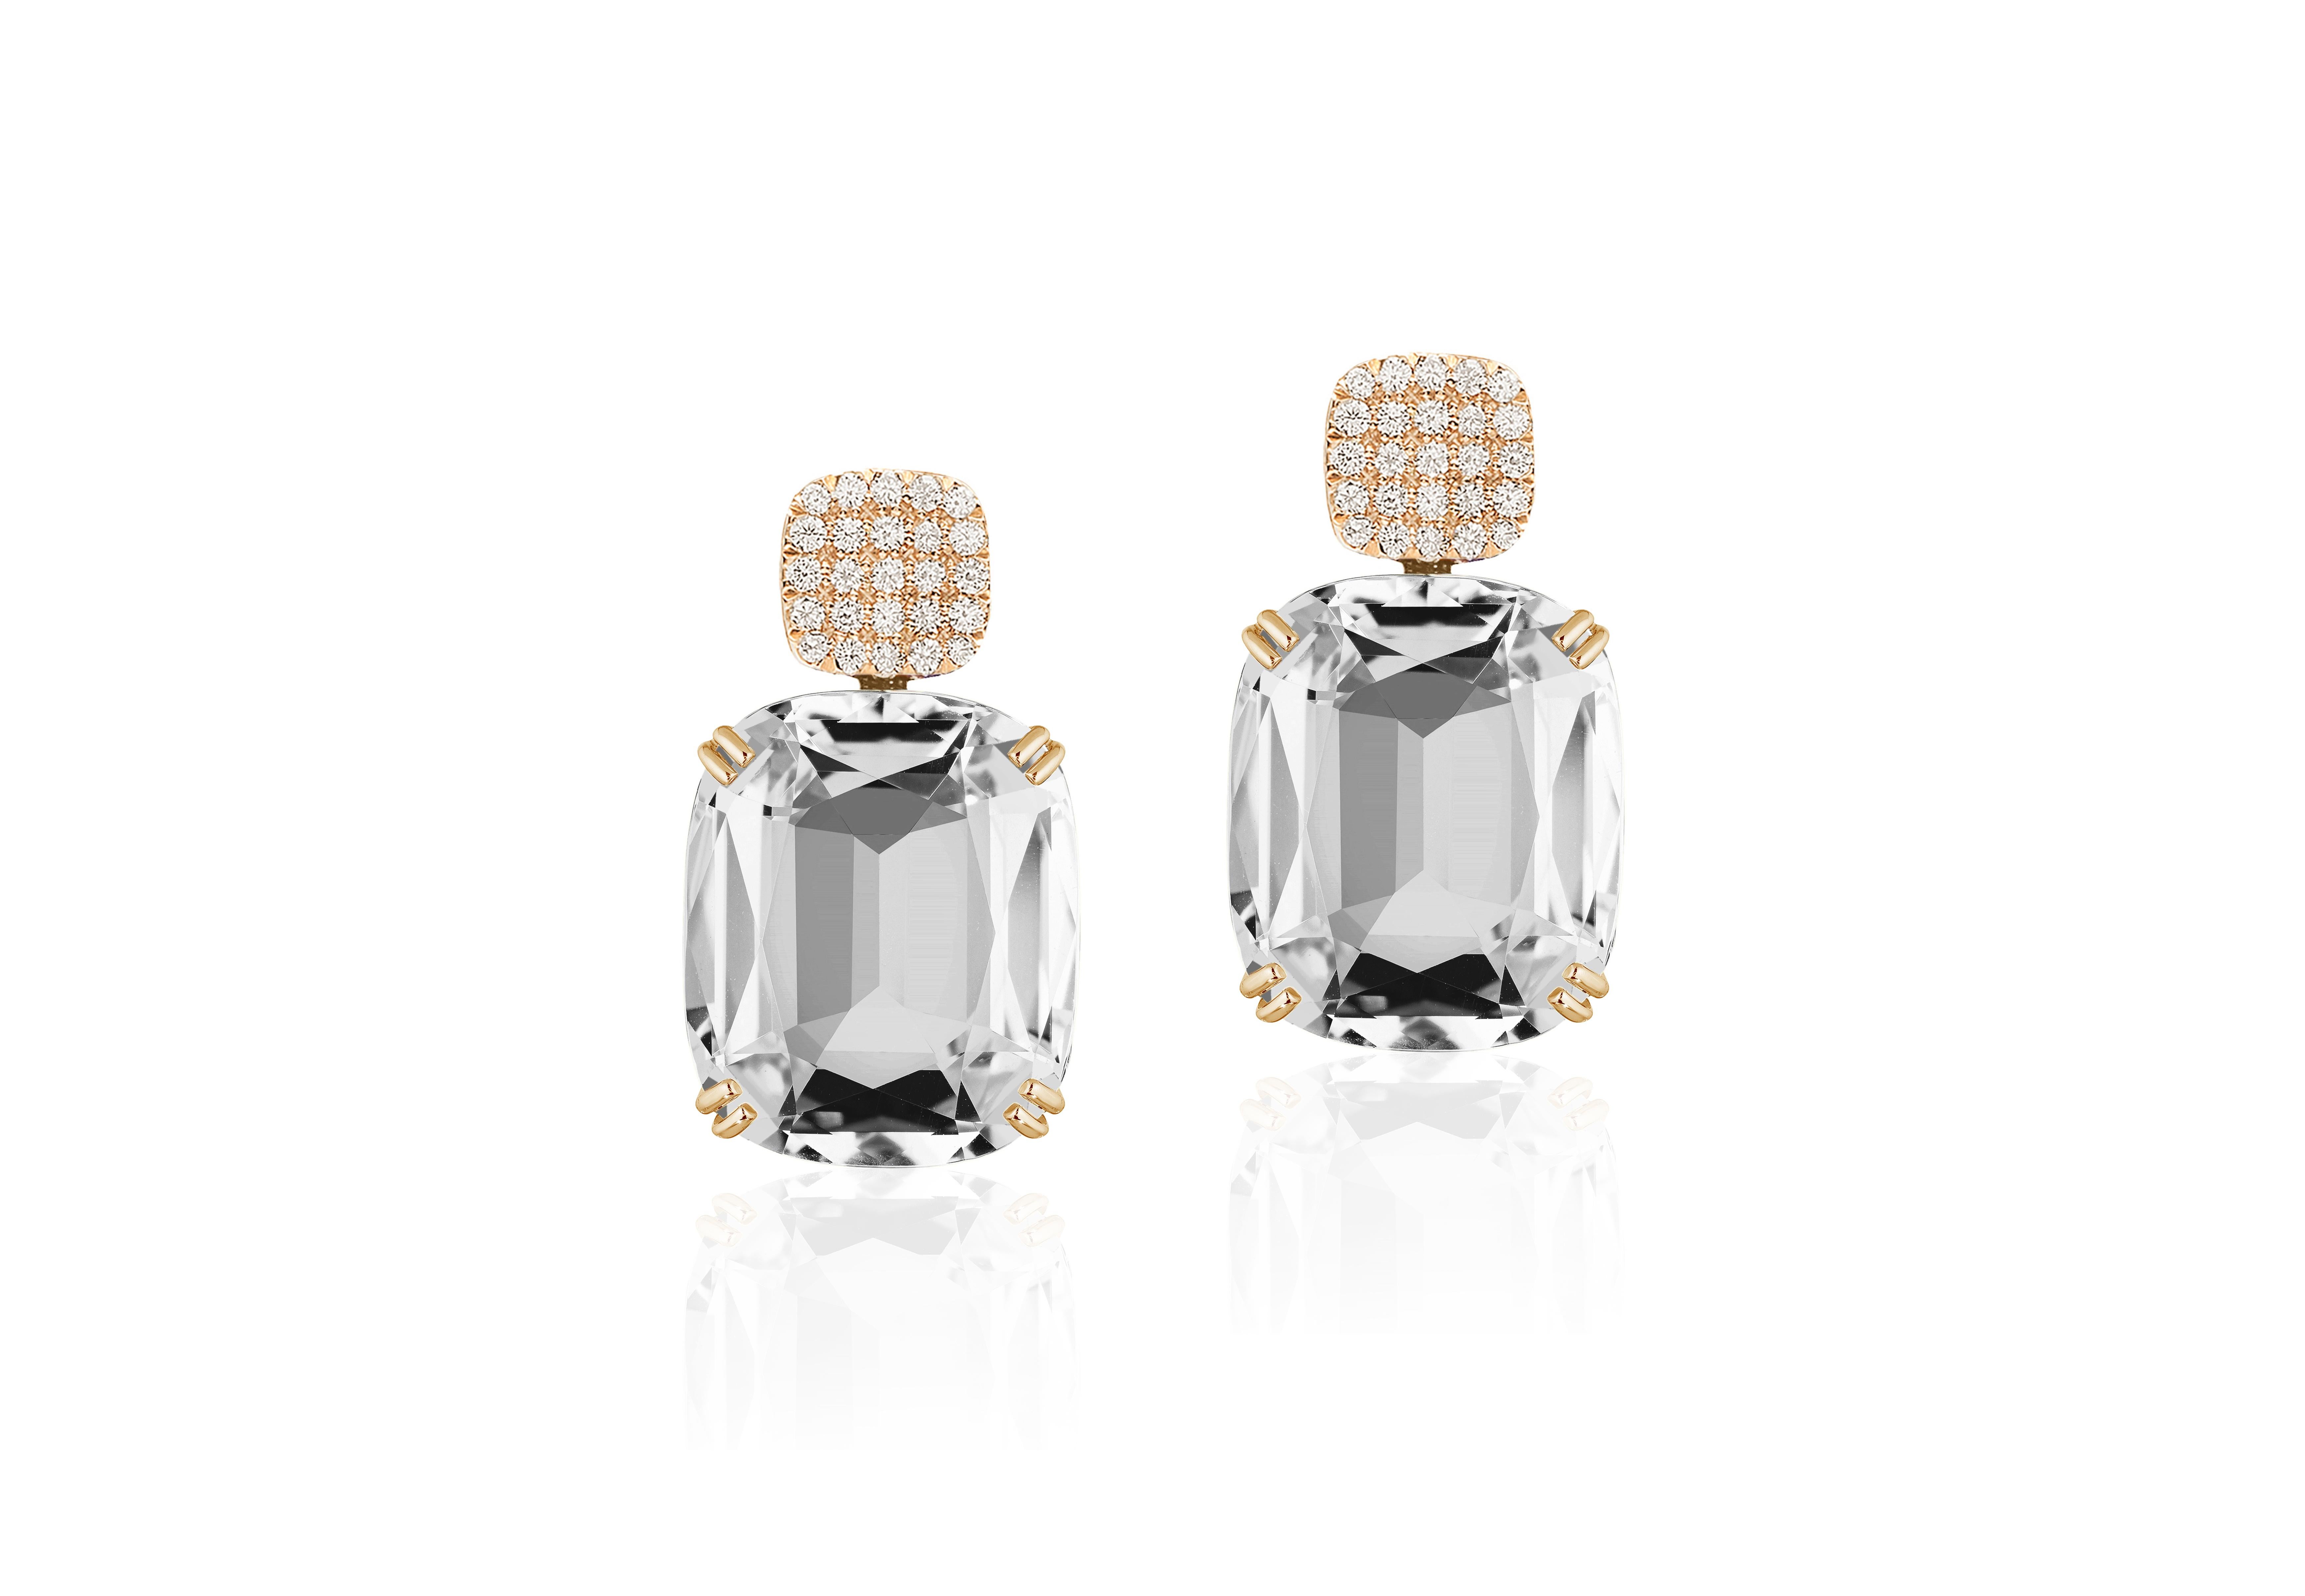 Introducing the stunning rock crystal Cushion & Diamonds Earrings from our popular 'Gossip' Collection. 
The focal point of these earrings is the mesmerizing rock crystal cushion-cut gemstone. The cushion-cut shape adds a touch of vintage charm,